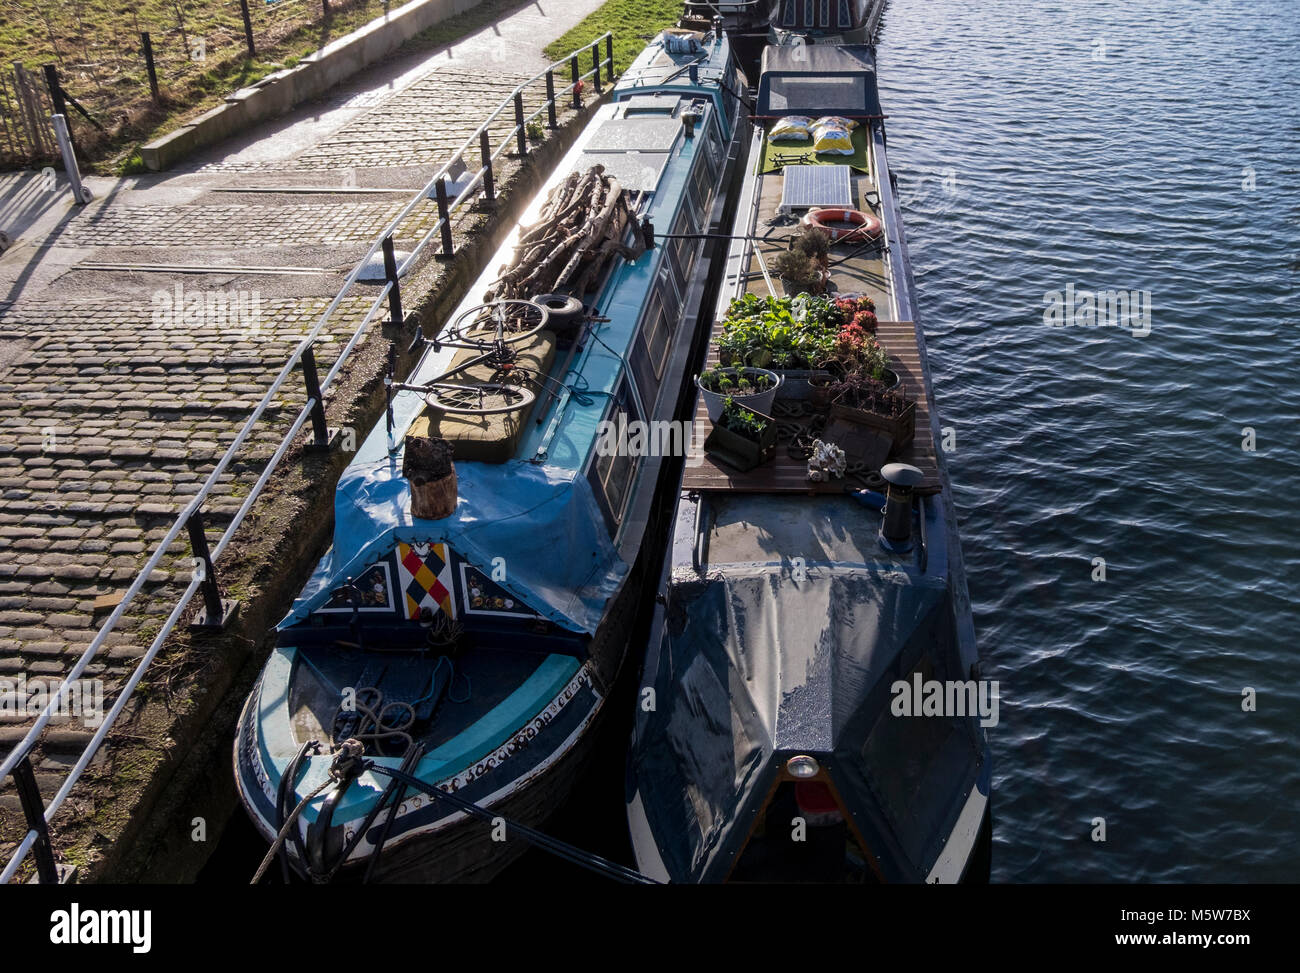 Canal Boats, Narrowboats, Canal Barges, sustainable, peaceful, vegetarian, environmentally conscious living Stock Photo